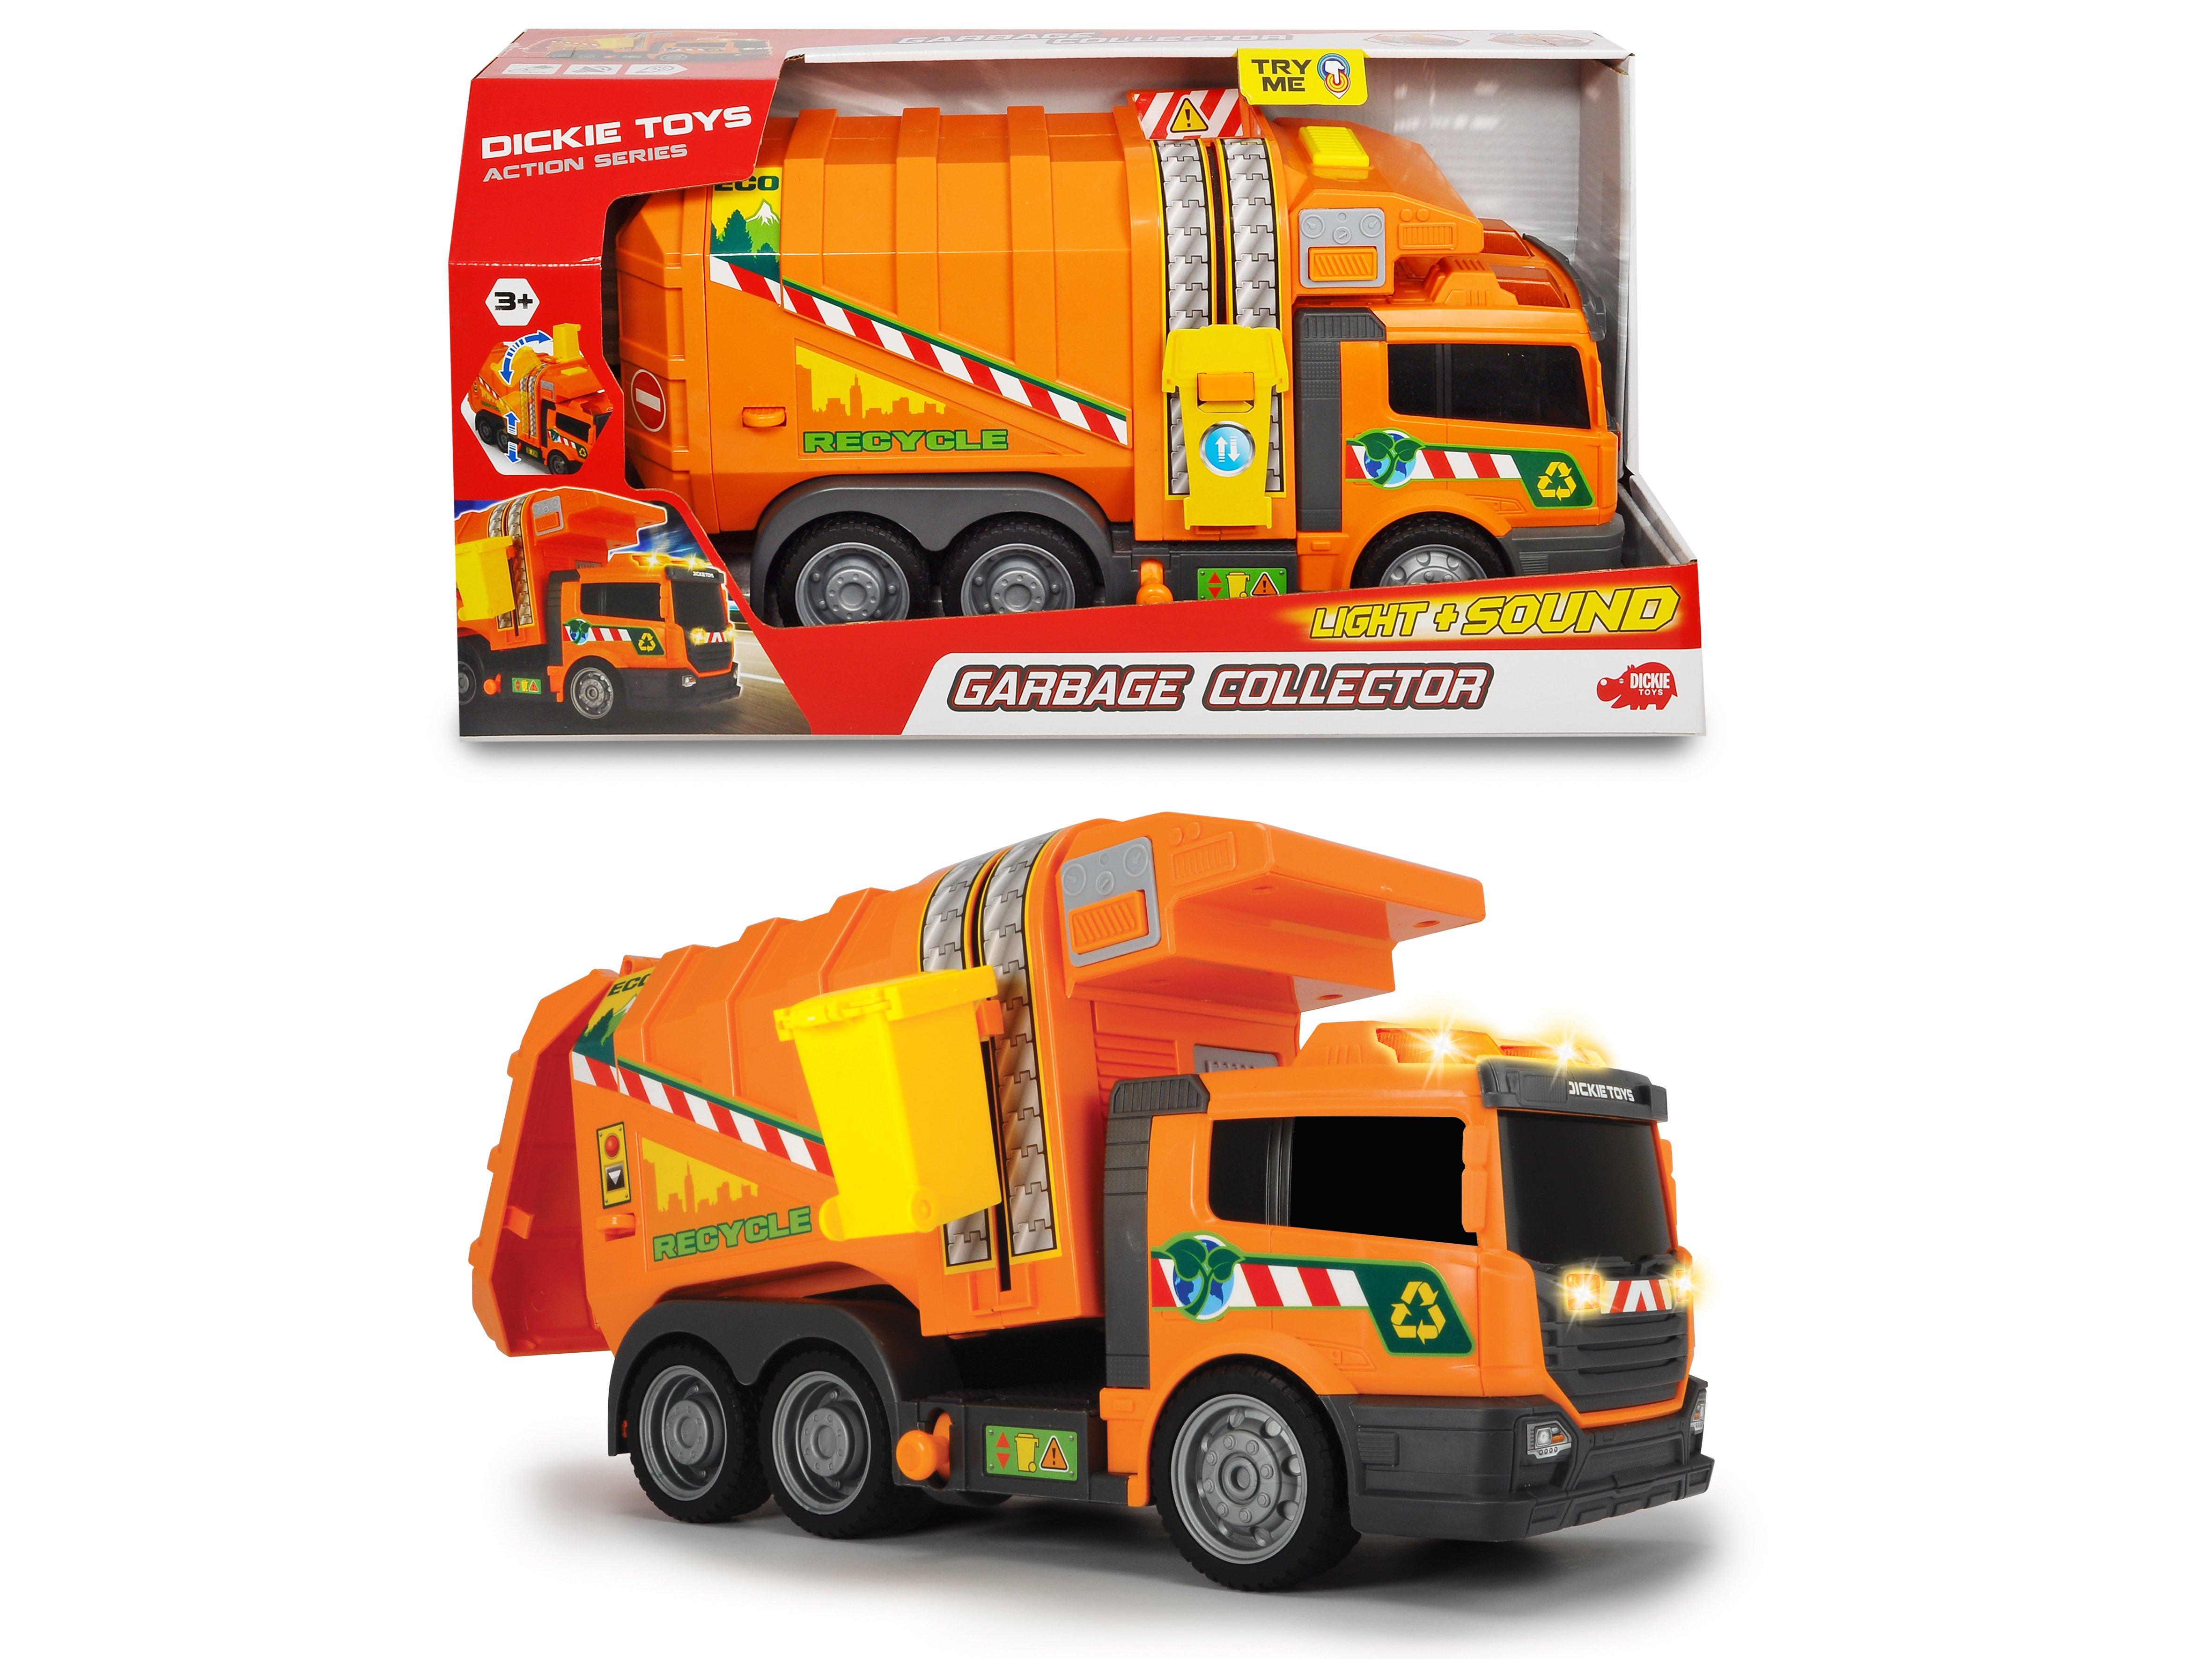 Dickie Toys Camion Poubelle